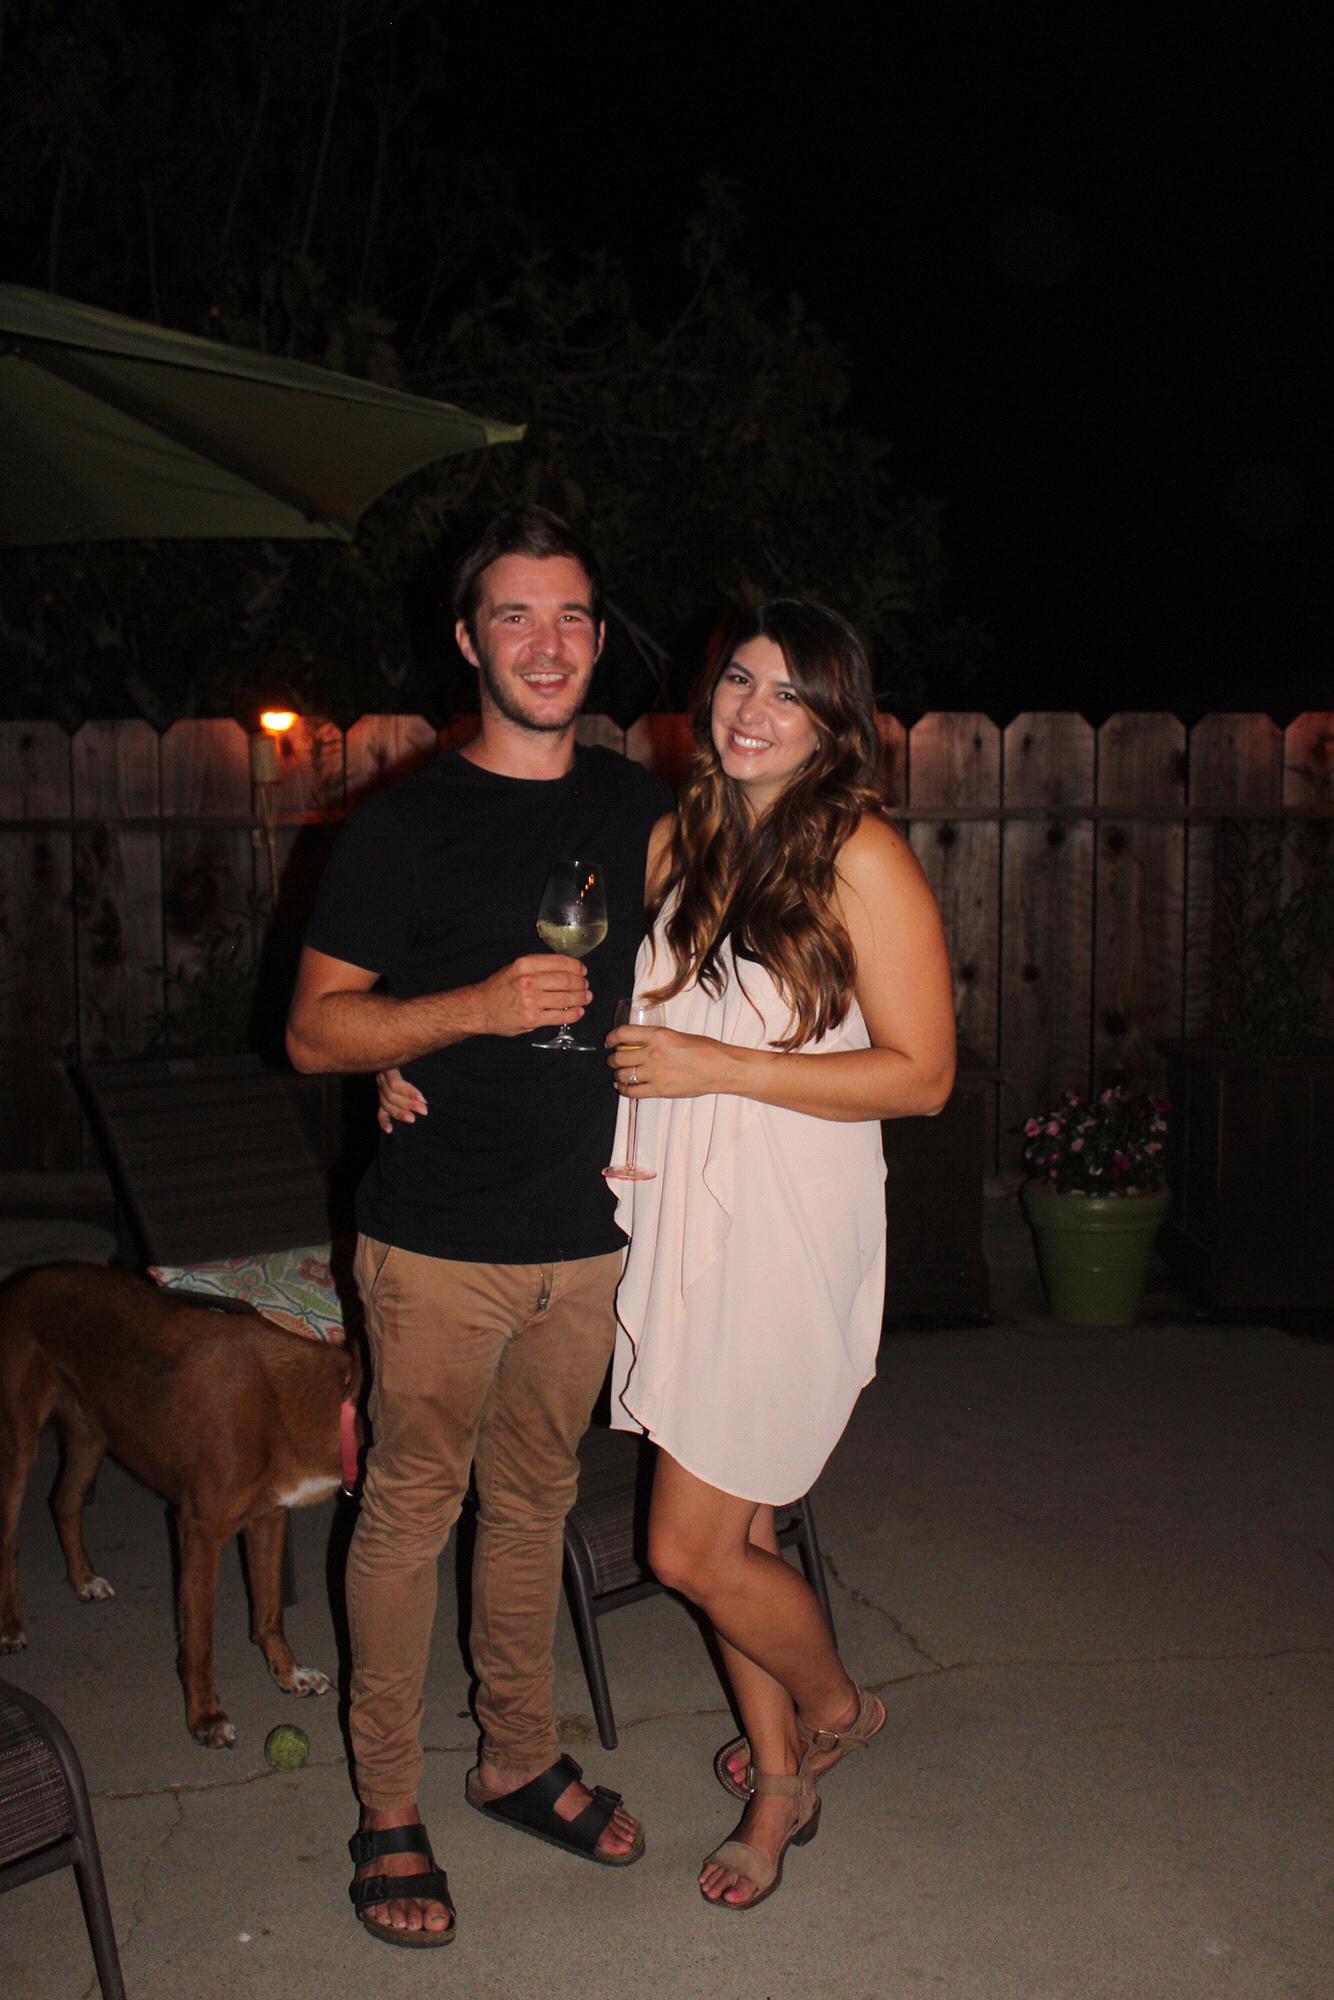 Our engagement party, hosted by Katy and my parents. August 2019